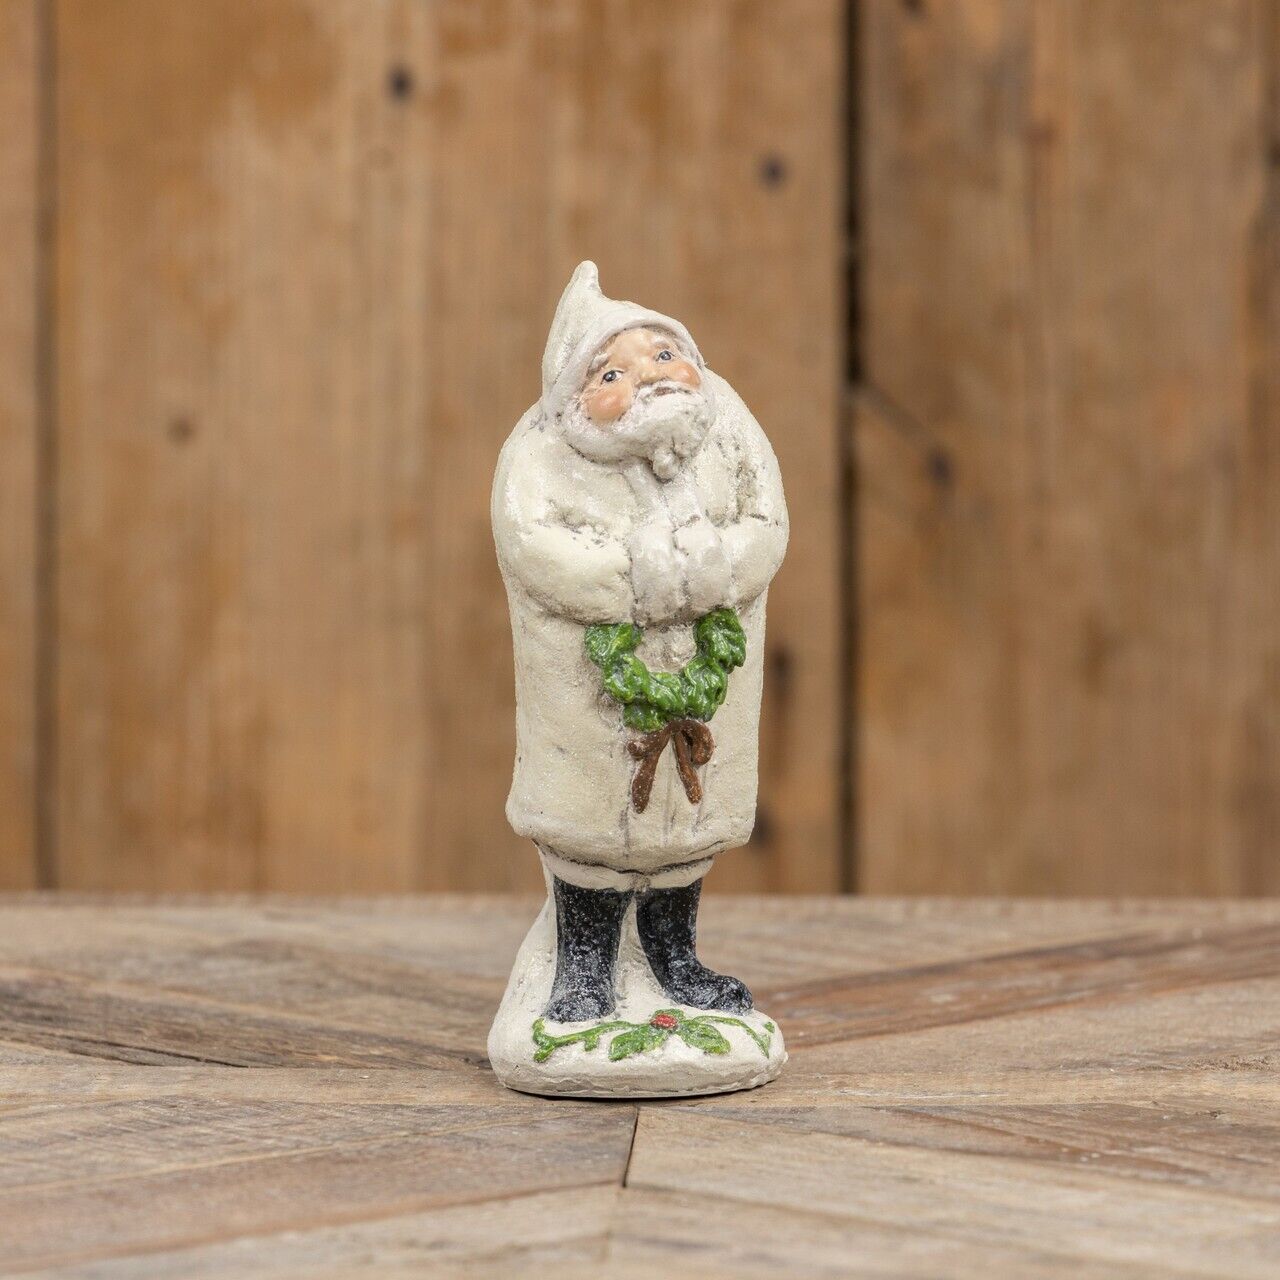 Primitive Whimsical Ivory & Glitter Santa Claus Figure with Wreath 7.5 in